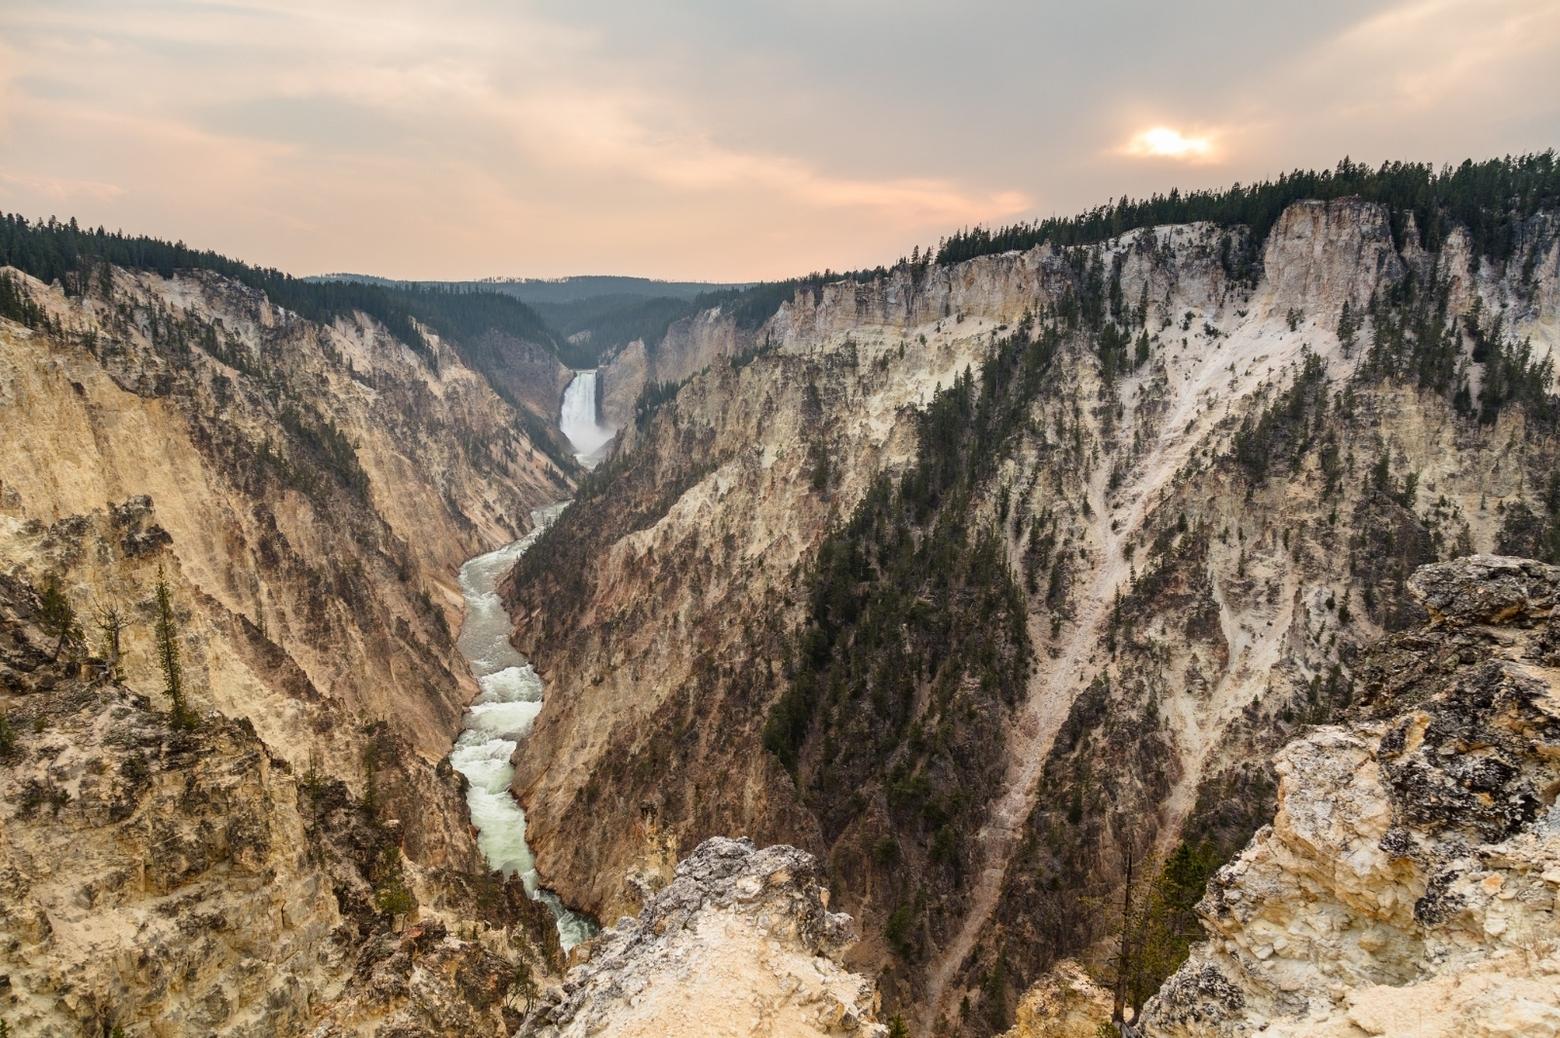 Grand Canyon of the Yellowstone at sunset from Artist's Point. As wild and rugged as Greater Yellowstone is, the region is fragile and facing unprecedented pressure from human development, recreation and the big one, climate change. Photo courtesy Jacob W. Frank/NPS